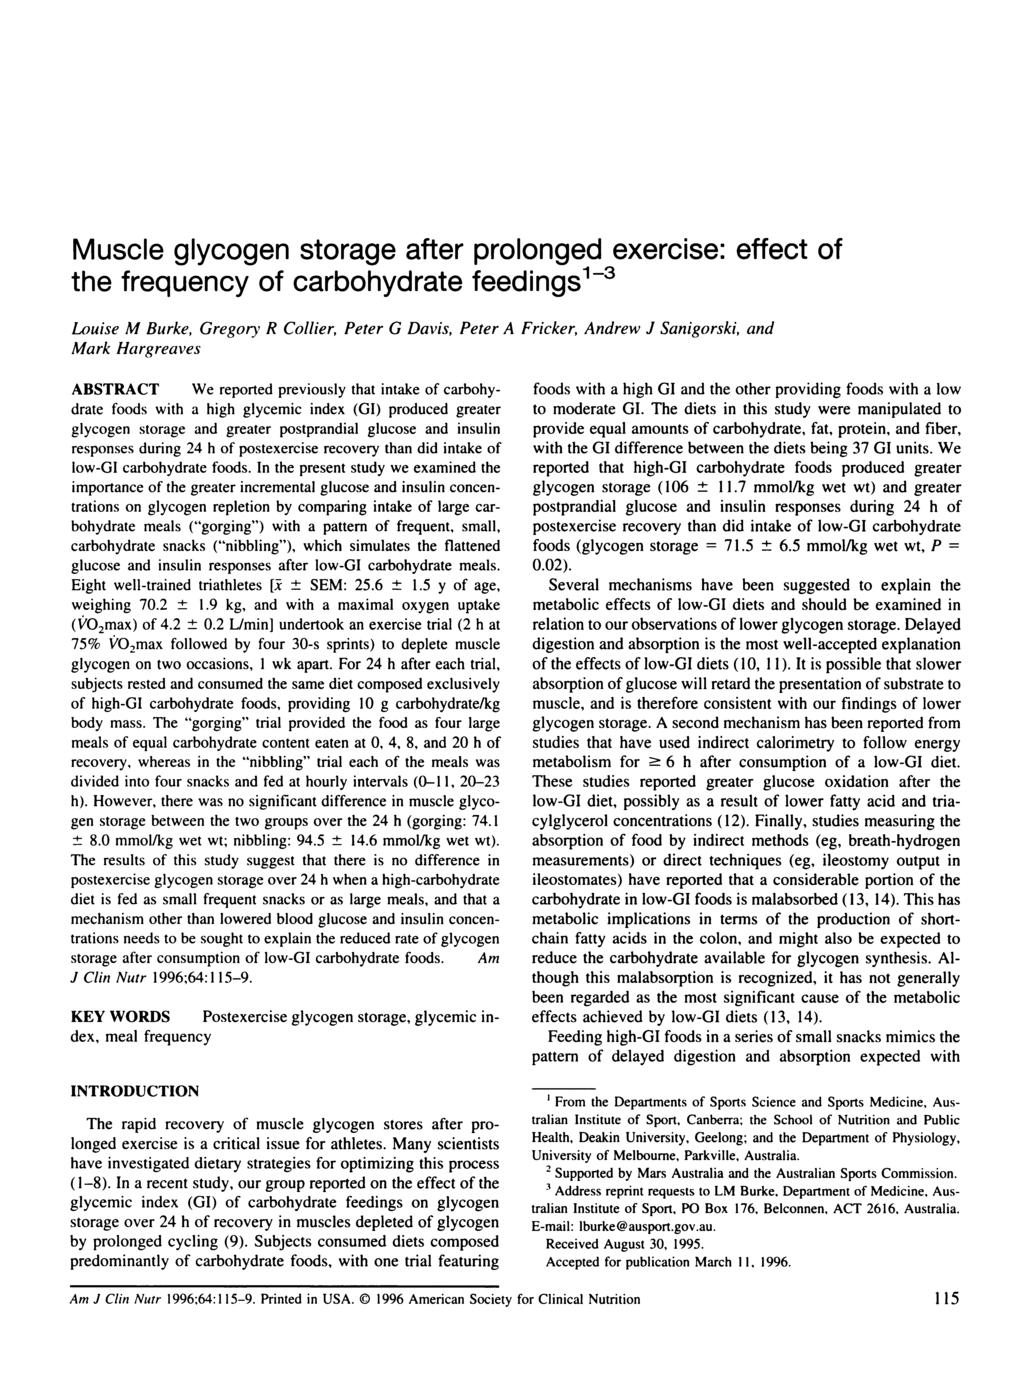 Muscle glycogen storage after prolonged exercise: effect of the frequency of carbohydrate feedings13 Louise M Burke, Gregory R Collier, Peter G Davis, Peter A Fricker, Andrew J Sanigorski, and Mark